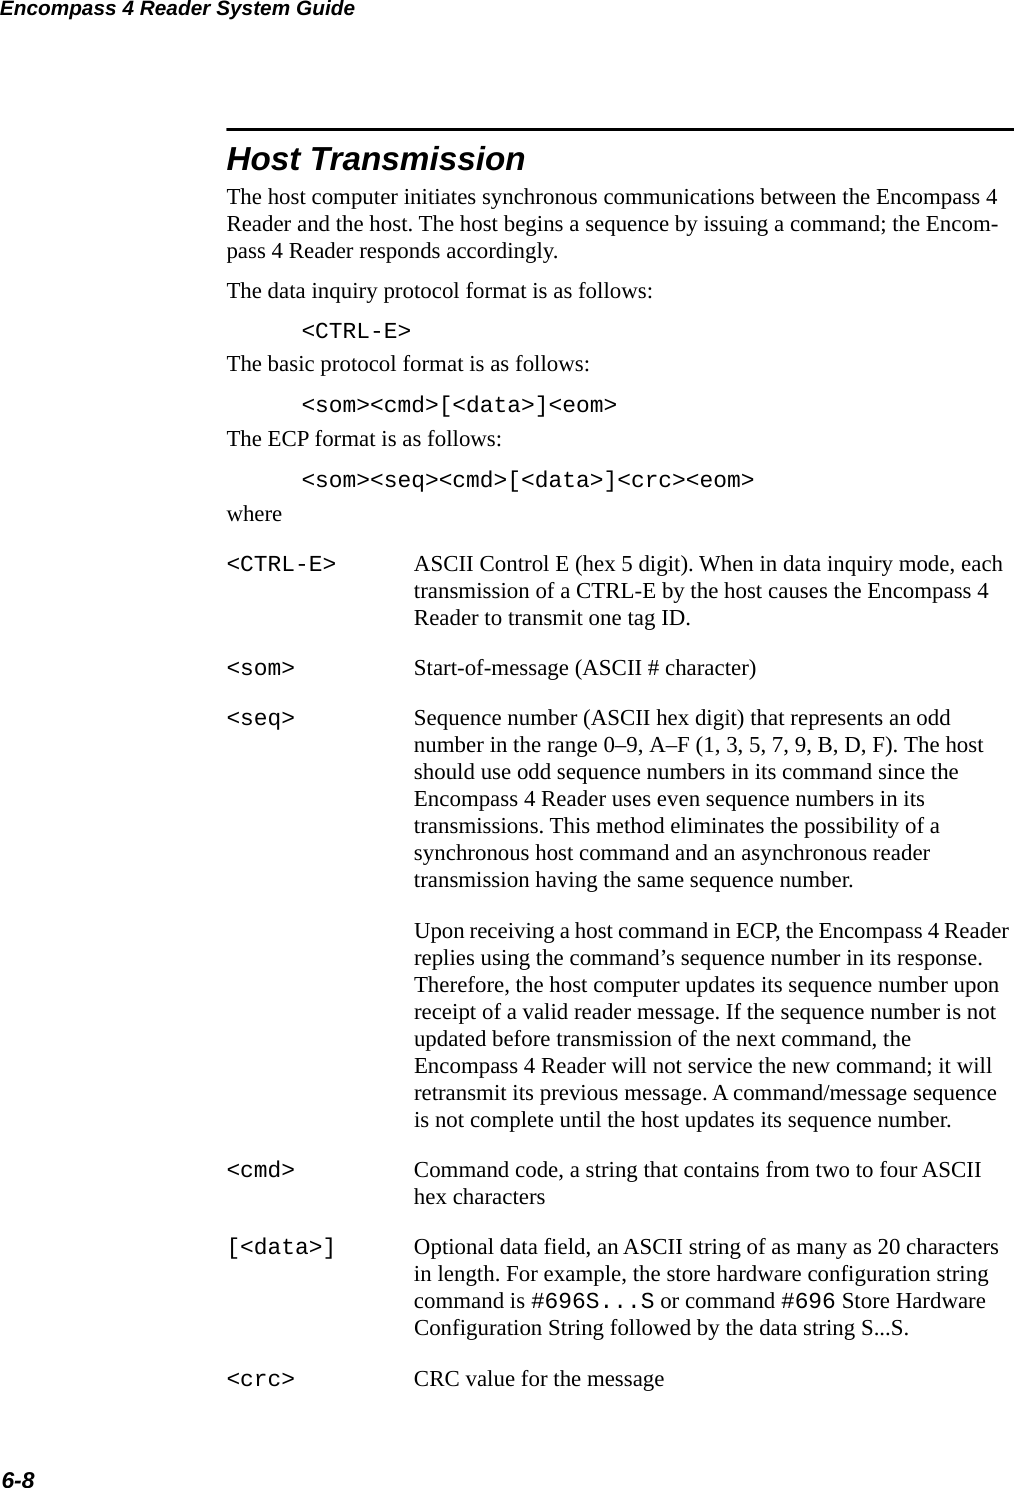 Encompass 4 Reader System Guide6-8Host TransmissionThe host computer initiates synchronous communications between the Encompass 4 Reader and the host. The host begins a sequence by issuing a command; the Encom-pass 4 Reader responds accordingly.The data inquiry protocol format is as follows:&lt;CTRL-E&gt;The basic protocol format is as follows:&lt;som&gt;&lt;cmd&gt;[&lt;data&gt;]&lt;eom&gt;The ECP format is as follows:&lt;som&gt;&lt;seq&gt;&lt;cmd&gt;[&lt;data&gt;]&lt;crc&gt;&lt;eom&gt;where&lt;CTRL-E&gt; ASCII Control E (hex 5 digit). When in data inquiry mode, each transmission of a CTRL-E by the host causes the Encompass 4 Reader to transmit one tag ID.&lt;som&gt; Start-of-message (ASCII # character)&lt;seq&gt; Sequence number (ASCII hex digit) that represents an odd number in the range 0–9, A–F (1, 3, 5, 7, 9, B, D, F). The host should use odd sequence numbers in its command since the Encompass 4 Reader uses even sequence numbers in its transmissions. This method eliminates the possibility of a synchronous host command and an asynchronous reader transmission having the same sequence number.Upon receiving a host command in ECP, the Encompass 4 Reader replies using the command’s sequence number in its response. Therefore, the host computer updates its sequence number upon receipt of a valid reader message. If the sequence number is not updated before transmission of the next command, the Encompass 4 Reader will not service the new command; it will retransmit its previous message. A command/message sequence is not complete until the host updates its sequence number.&lt;cmd&gt; Command code, a string that contains from two to four ASCII hex characters[&lt;data&gt;] Optional data field, an ASCII string of as many as 20 characters in length. For example, the store hardware configuration string command is #696S...S or command #696 Store Hardware Configuration String followed by the data string S...S.&lt;crc&gt; CRC value for the message